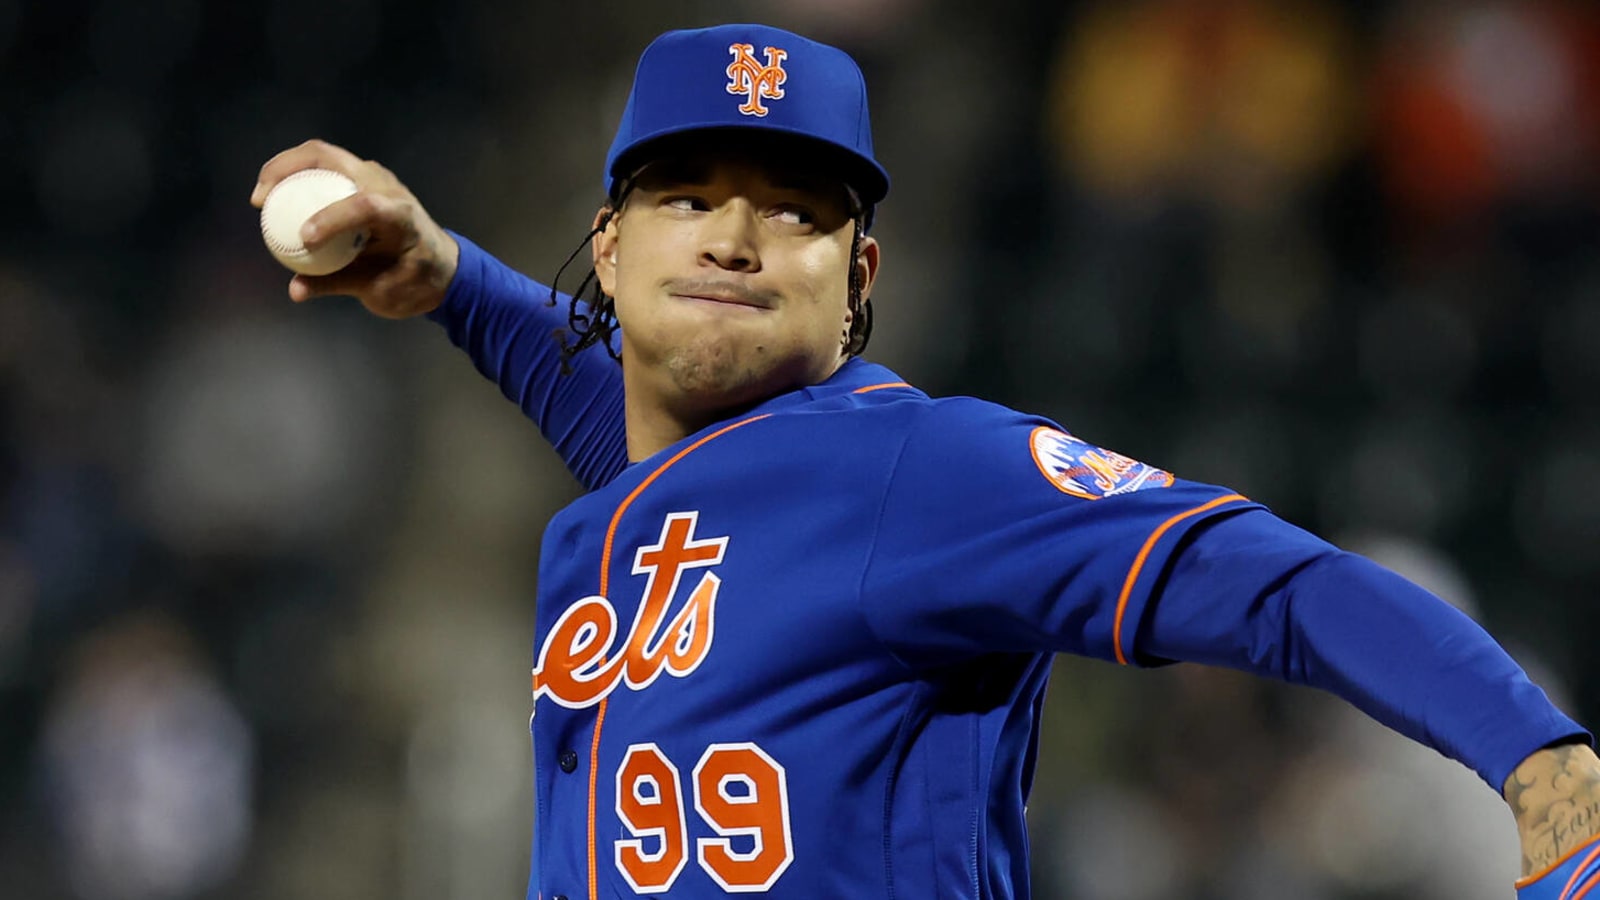 Ex-Mets pitcher tells whiny former teammates to shush after